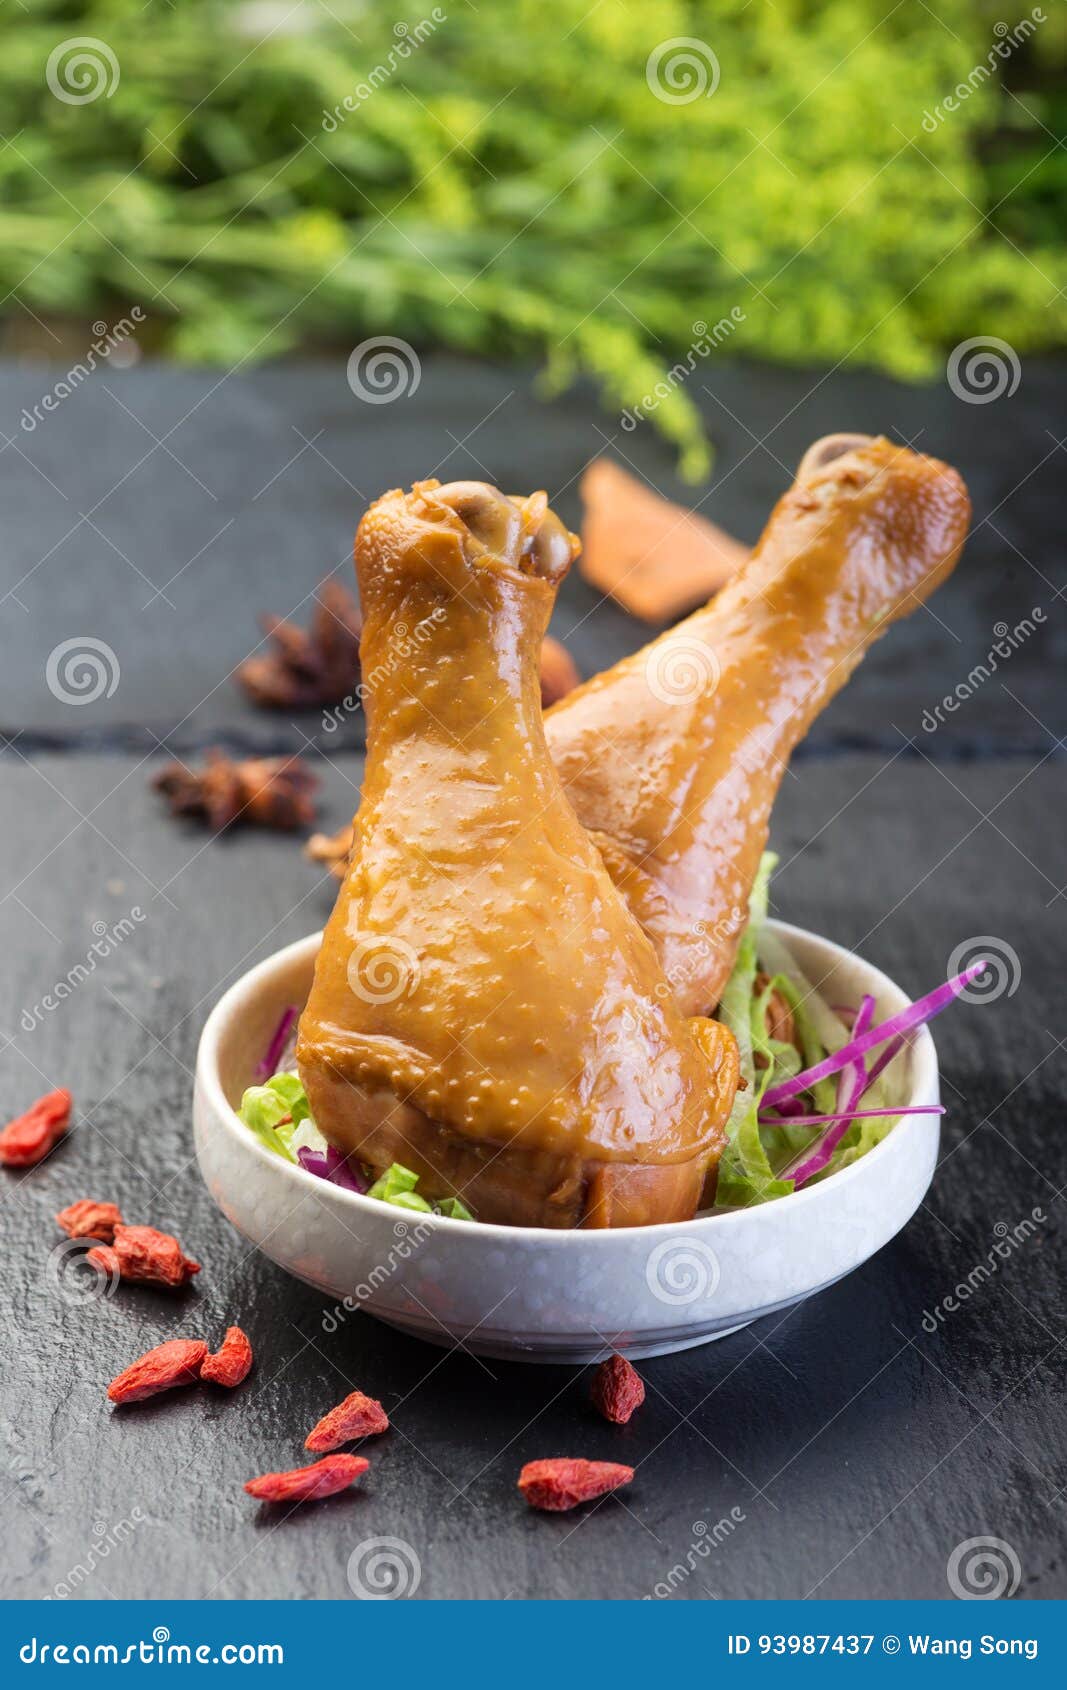 Chicken legs stock image. Image of nutrition, tasty, dining - 93987437